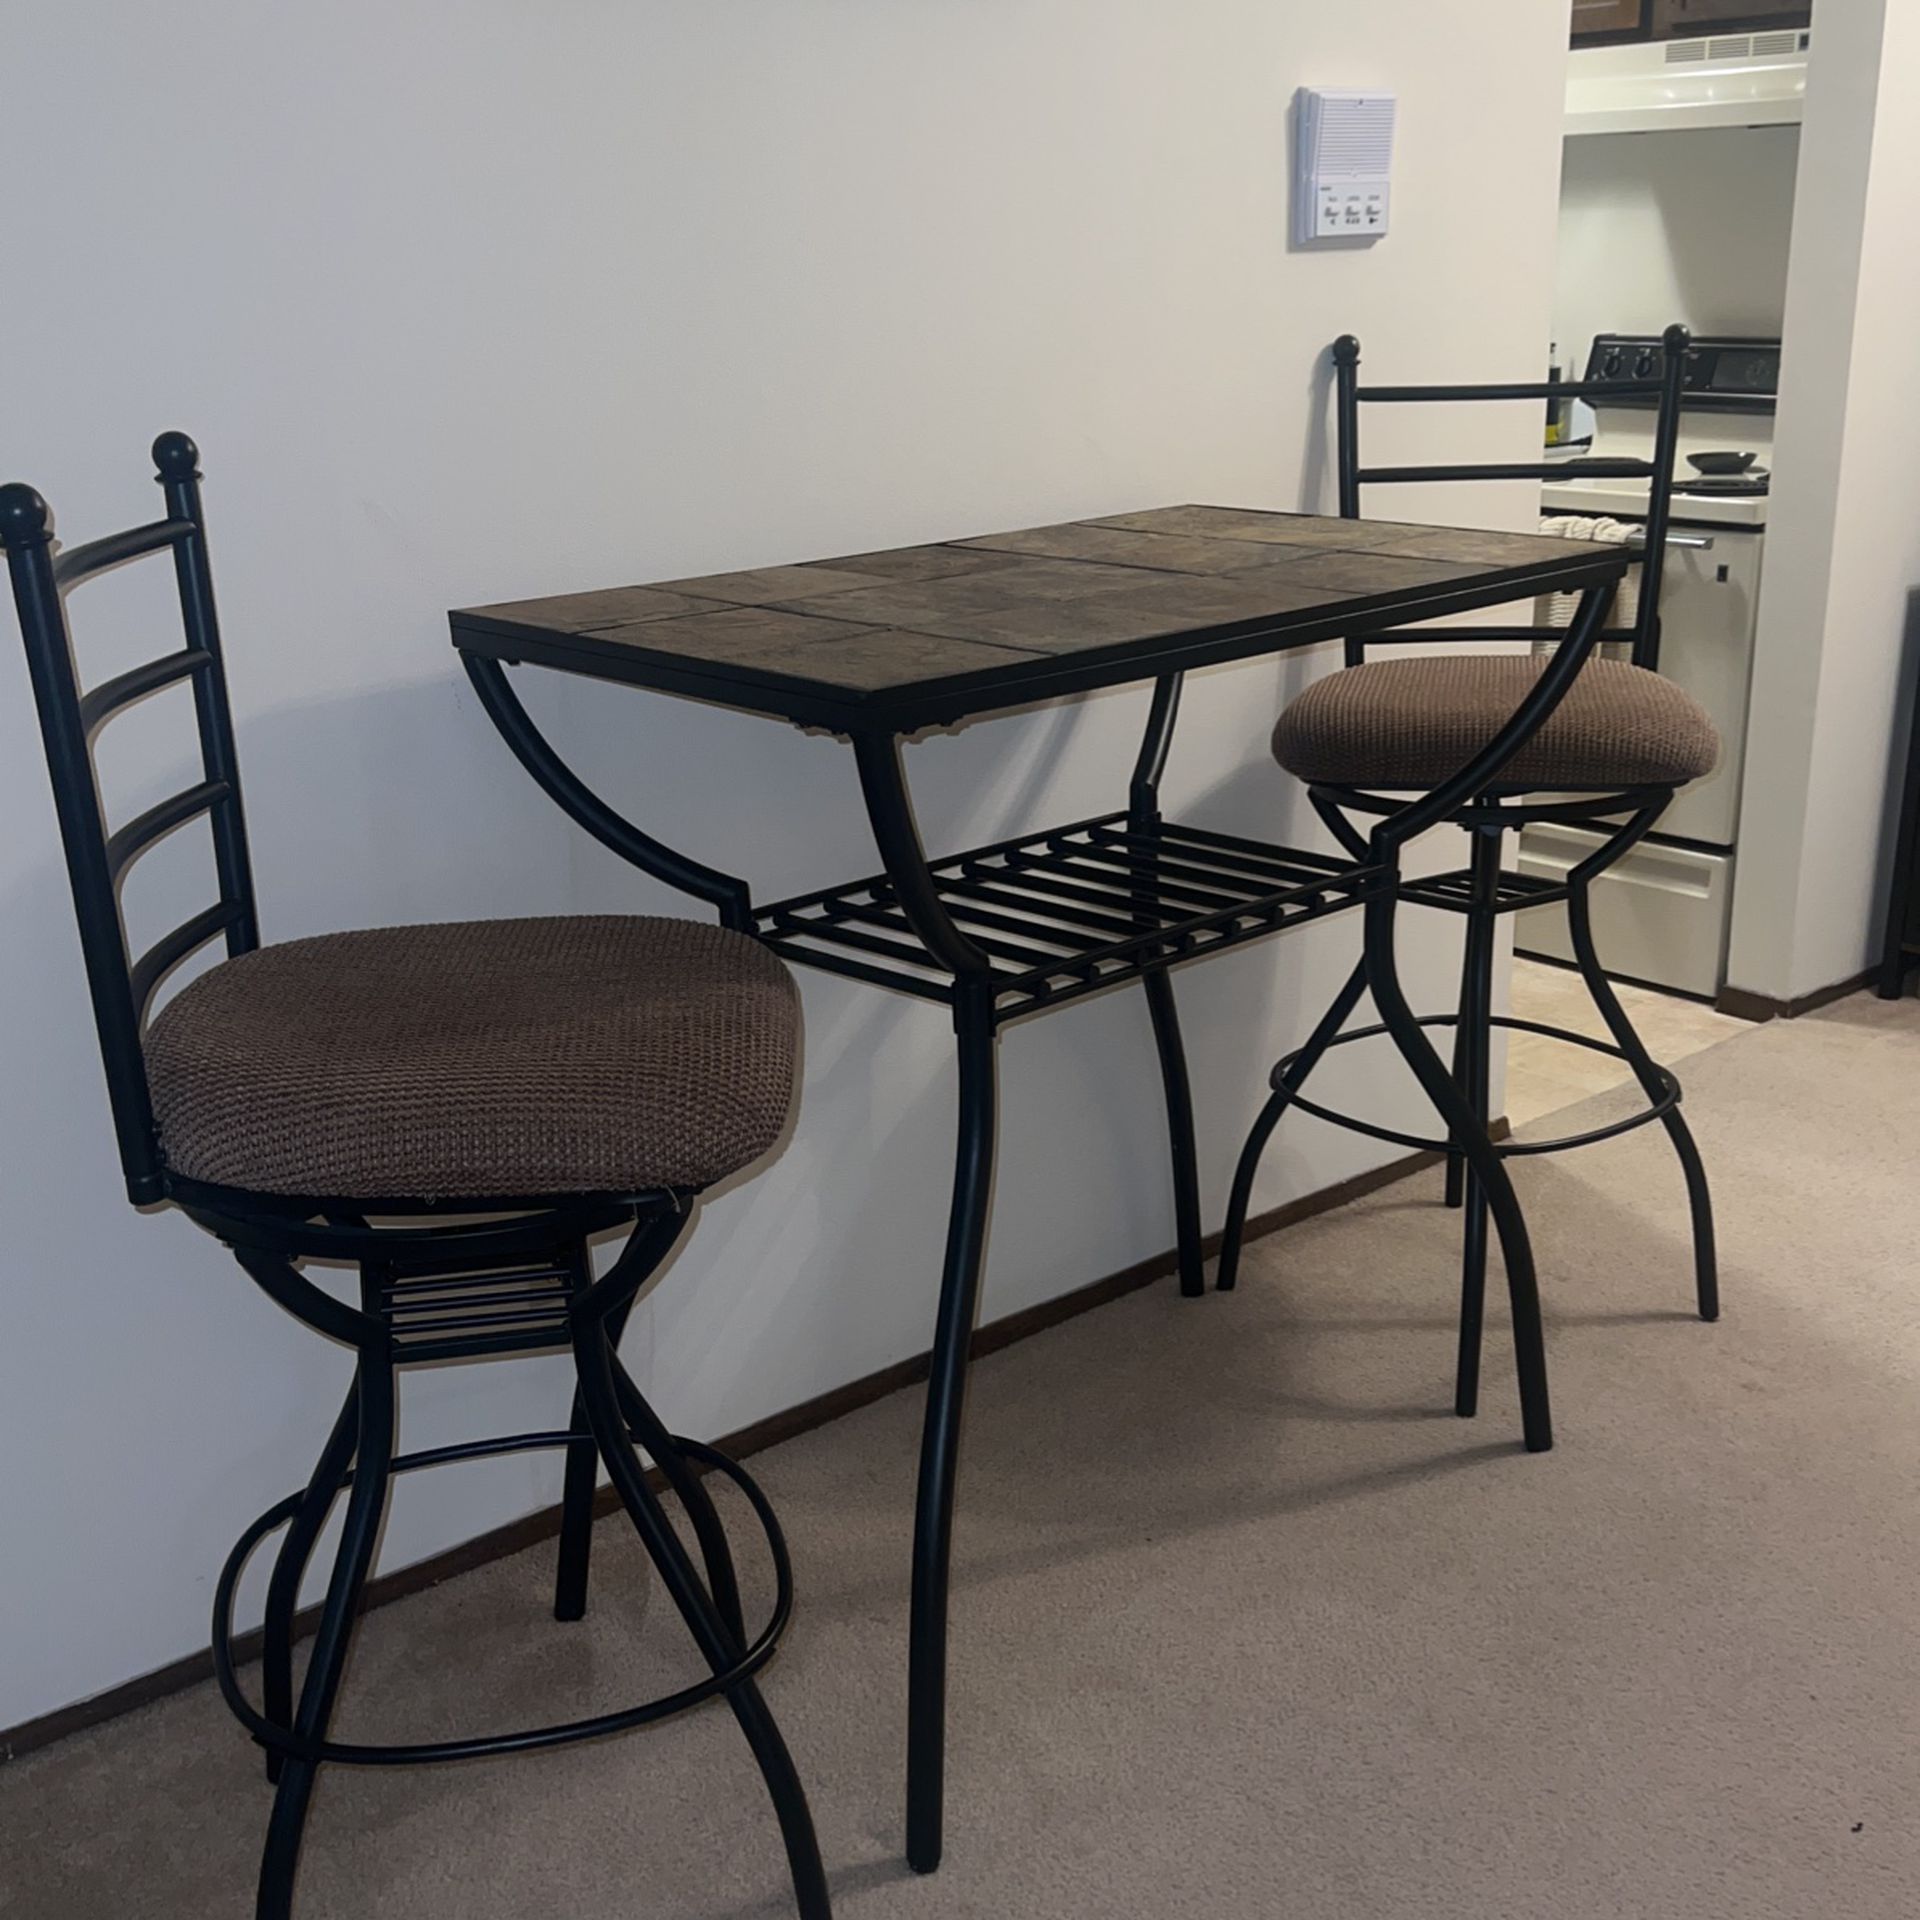 Tall Stone Dining Table With Chairs